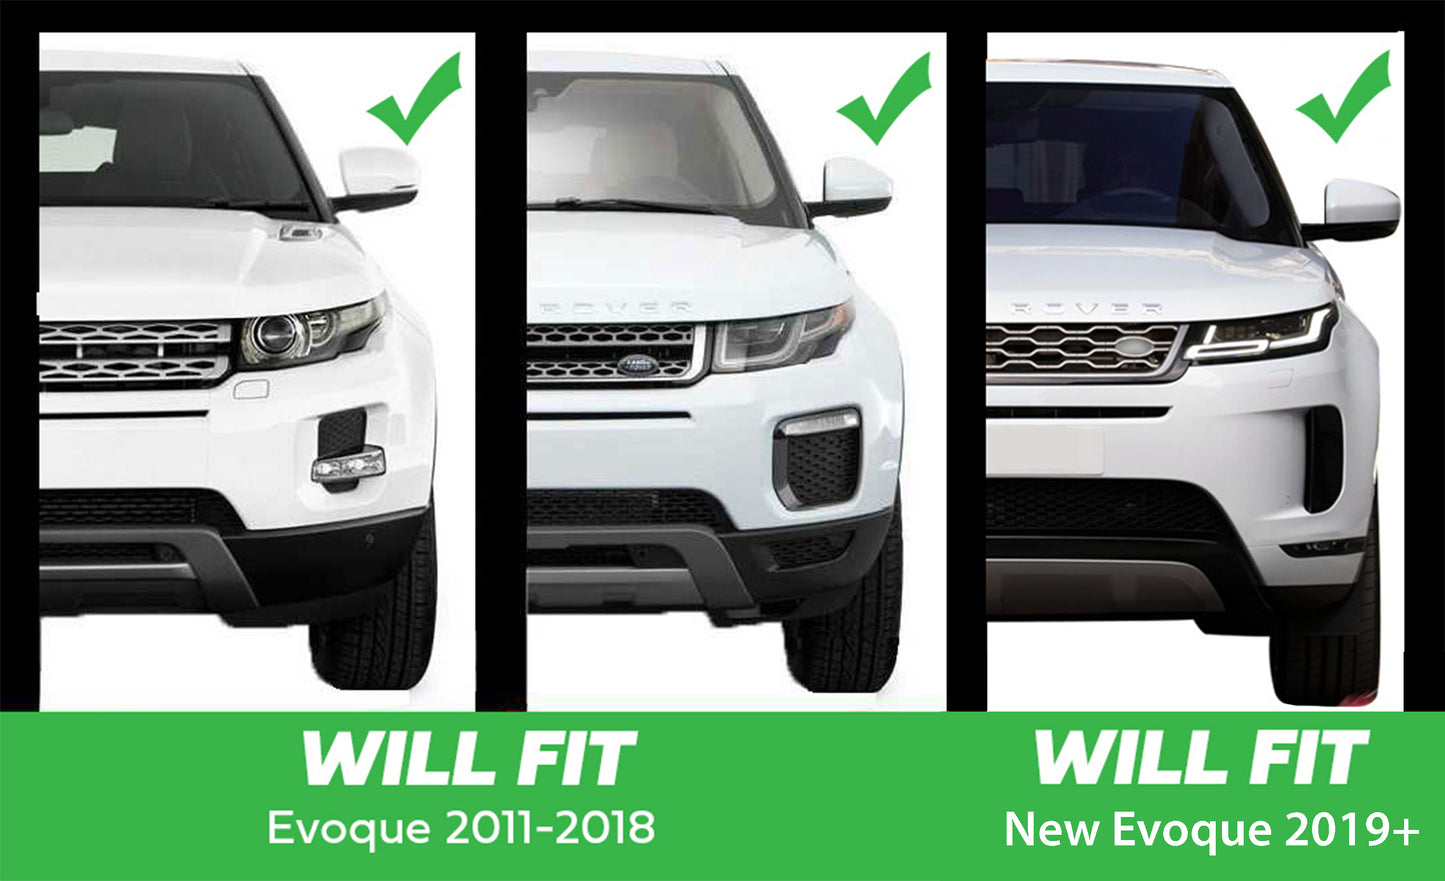 Genuine 7pc Clips for the Battery Cover on the Range Rover Evoque 2